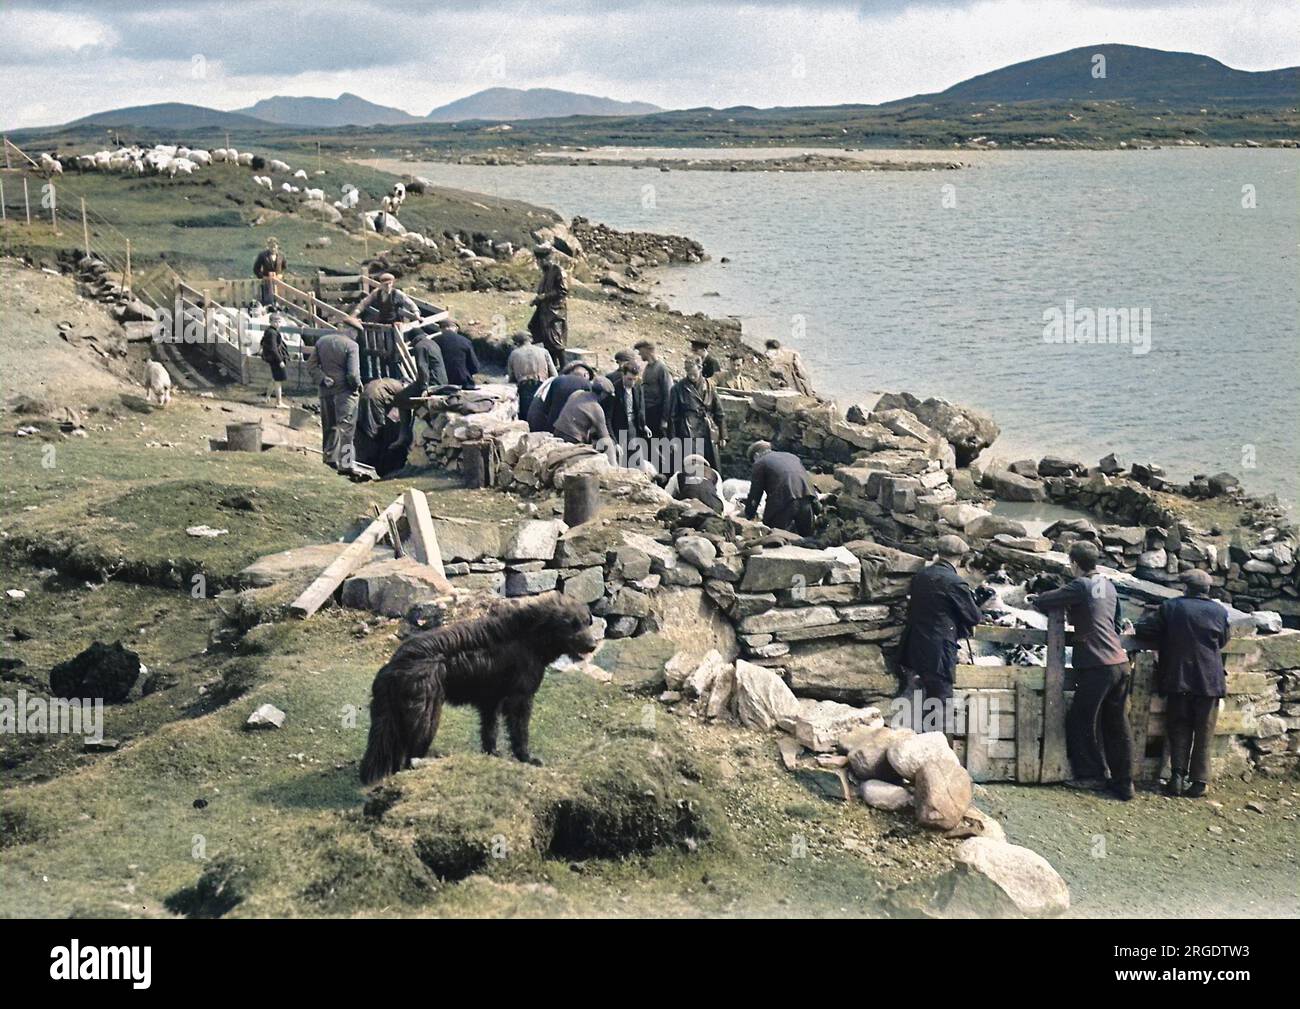 Shepherds at North Uist, Outer Hebrides, Scotland.  Some of the sheep are in pens, others are roaming free in the background. Stock Photo